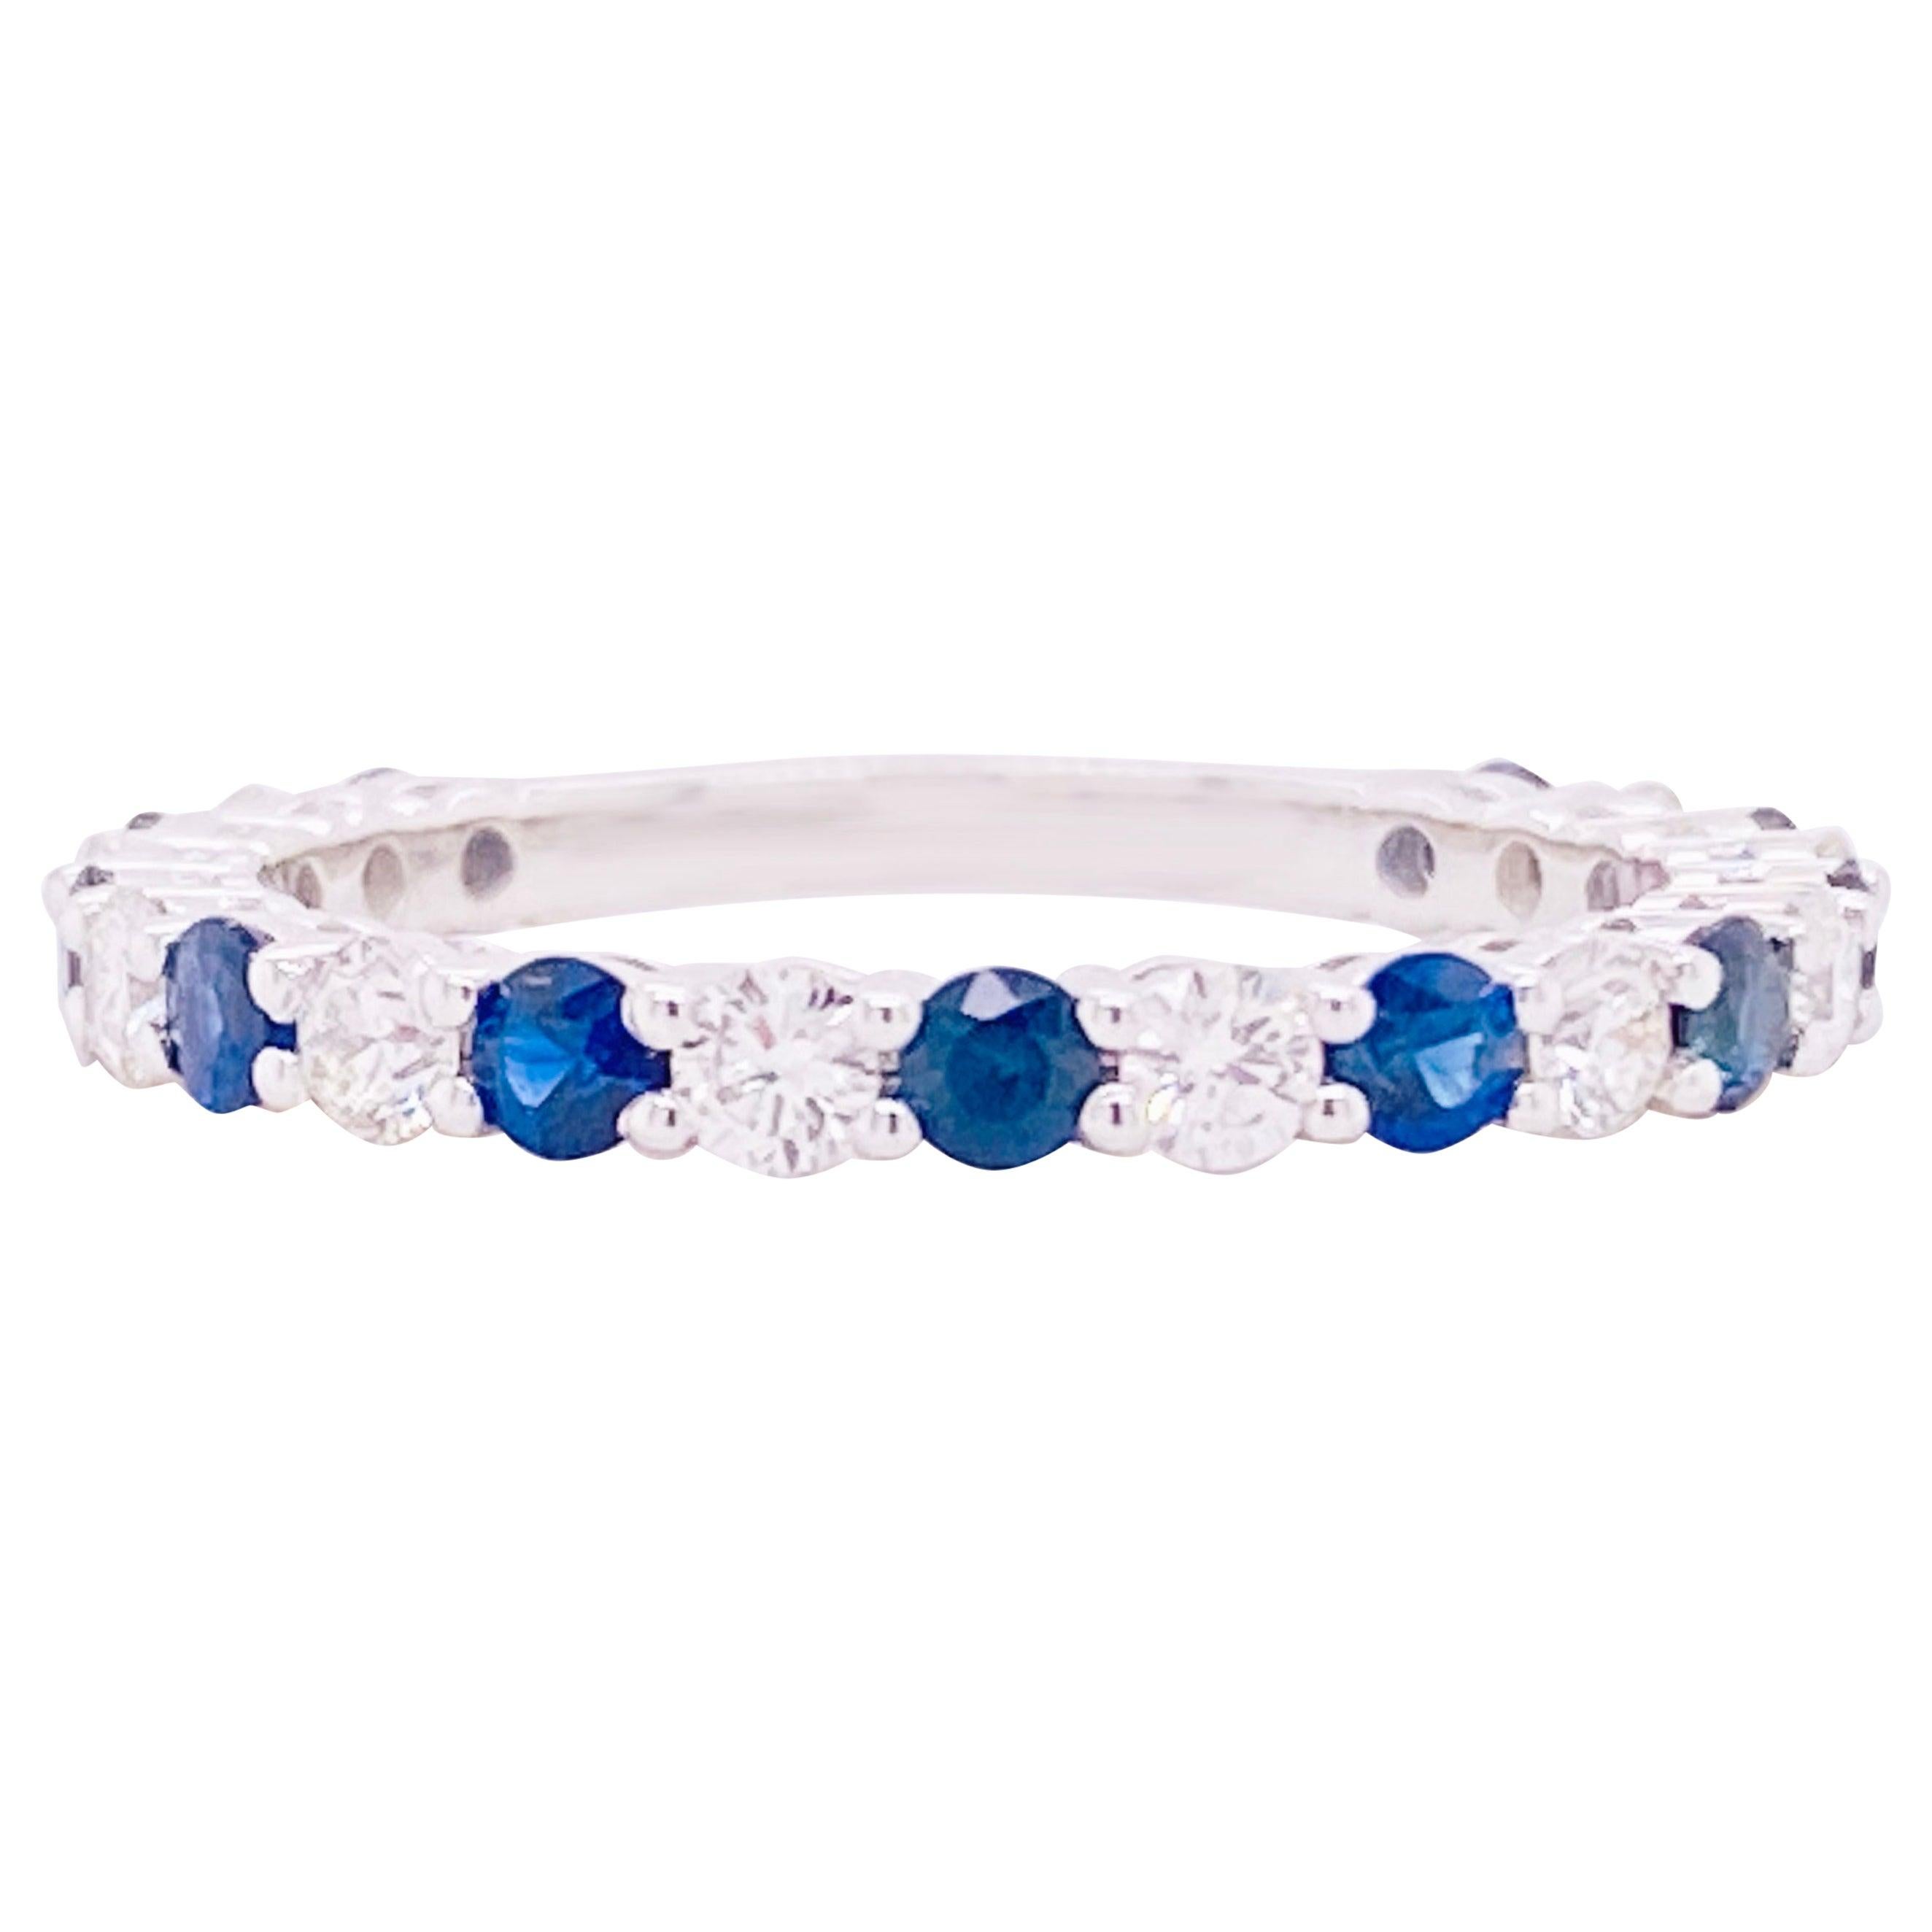 For Sale:  Sapphire Diamond Ring, Blue Sapphire, 18 Karat White Gold, Stackable Band